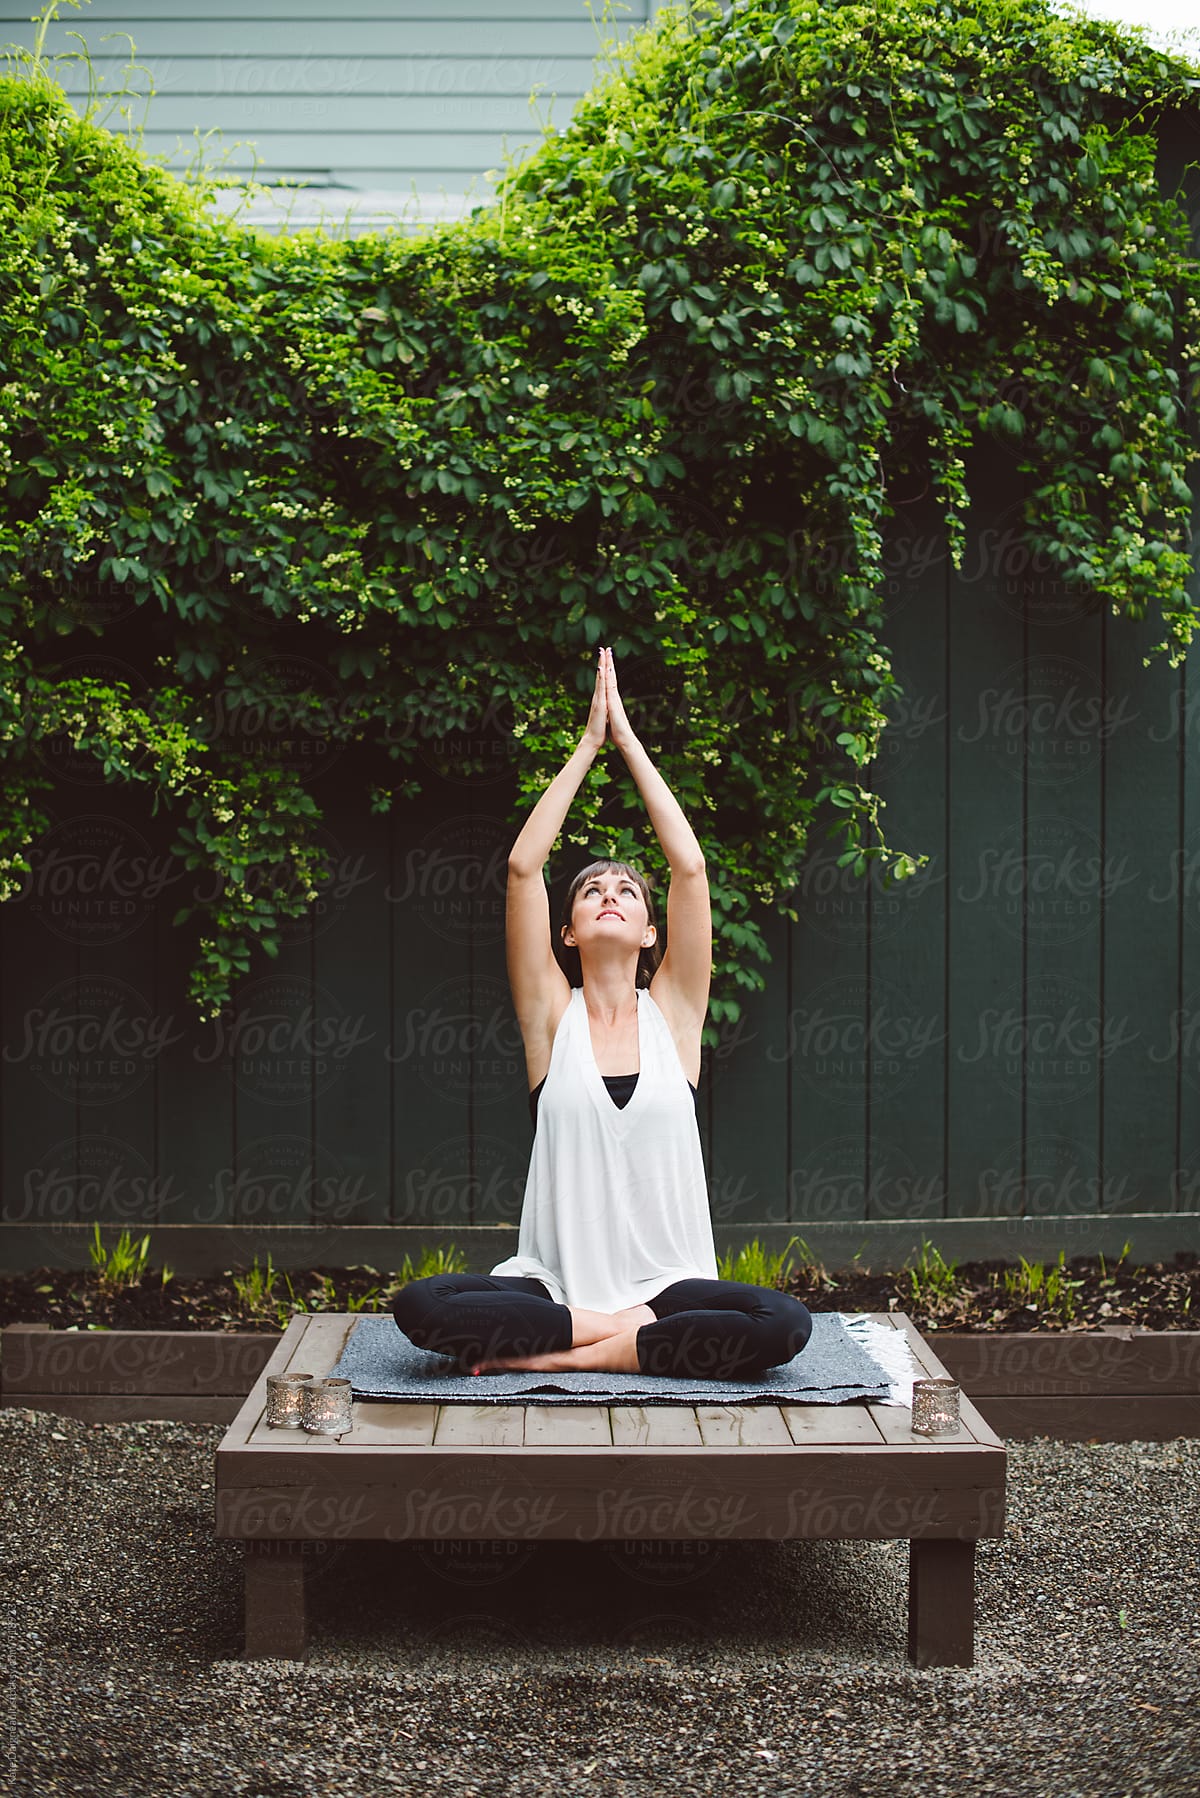 Young Woman Doing Yoga In Meditation Garden by Stocksy Contributor Kate  Ames - Stocksy